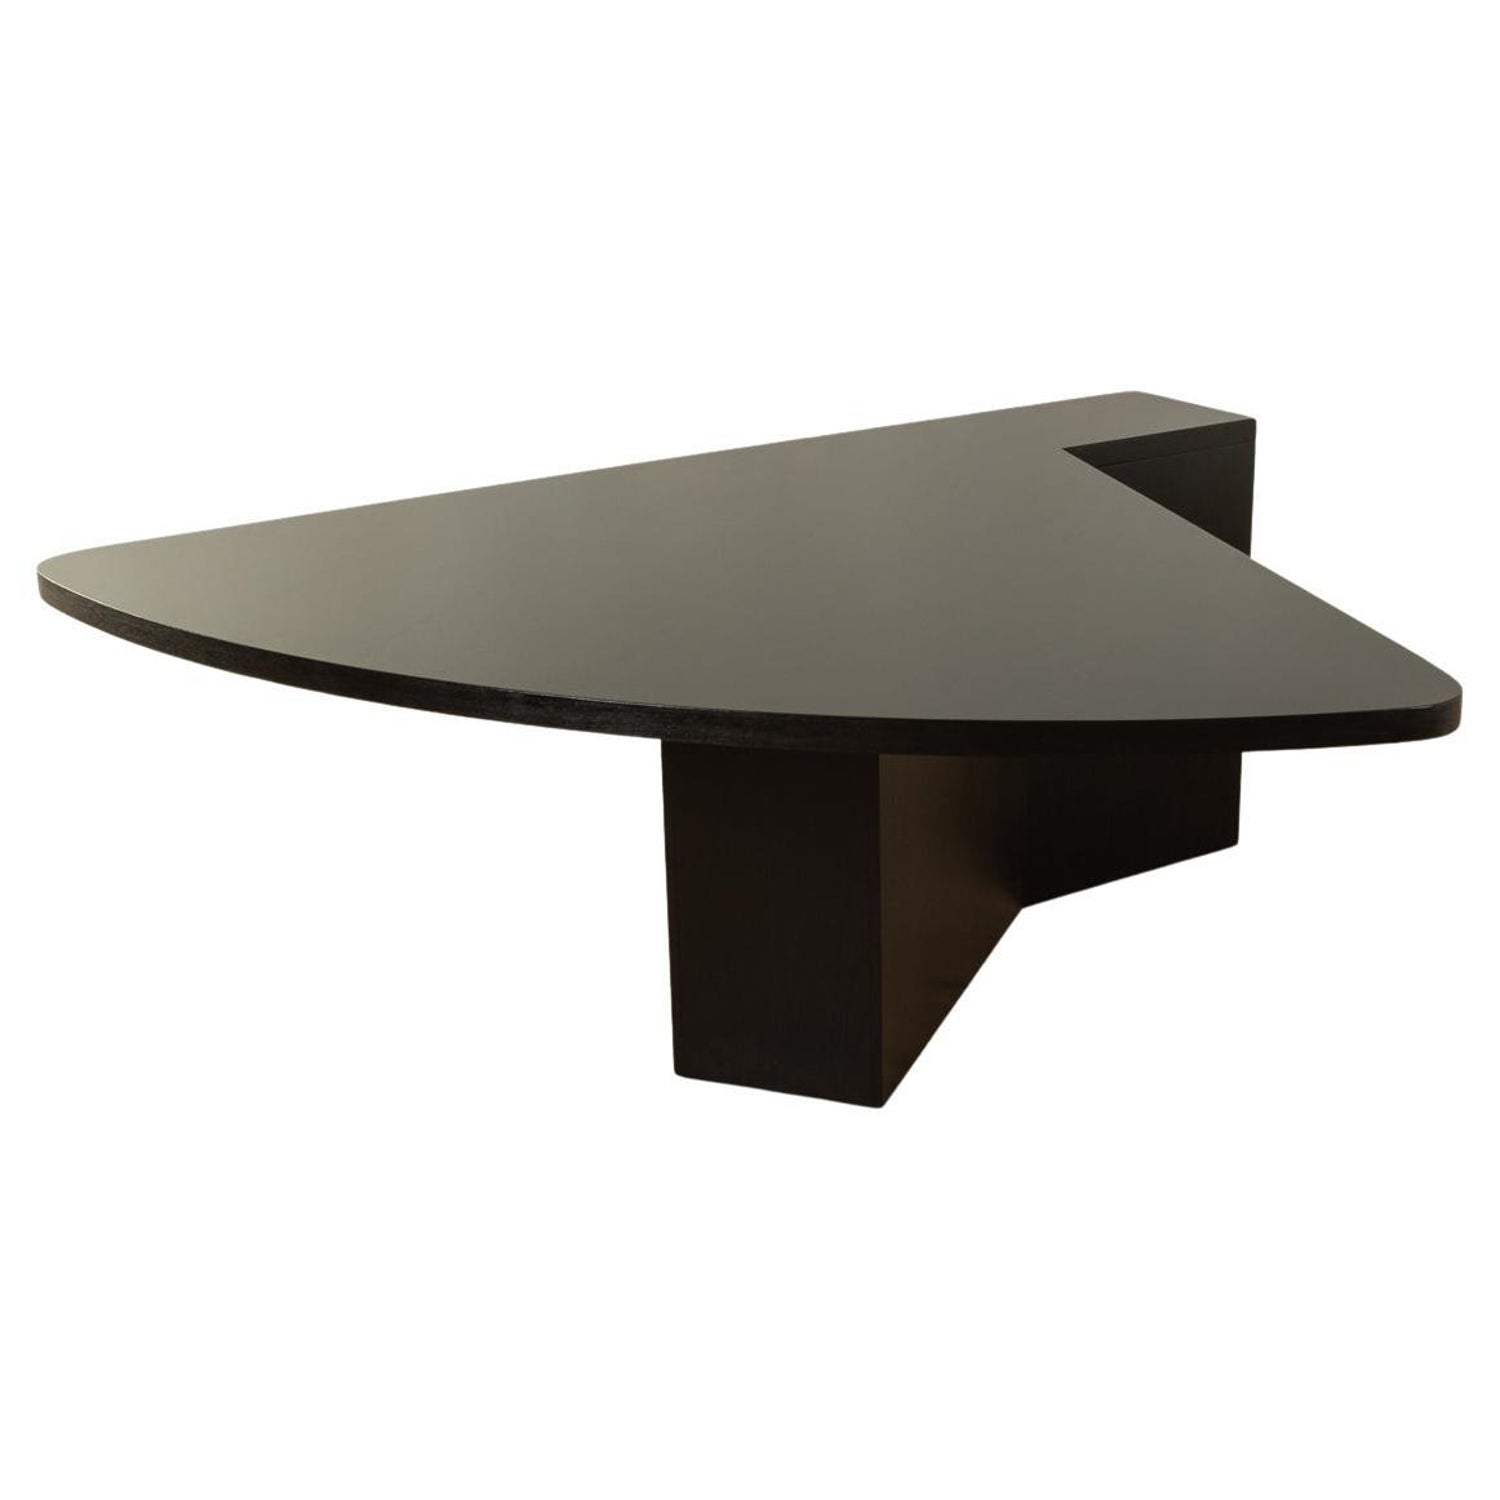 1970s Table M1 by Stefan Wewerka for Tecta, Bauhaus Desk For Sale at 1stDibs